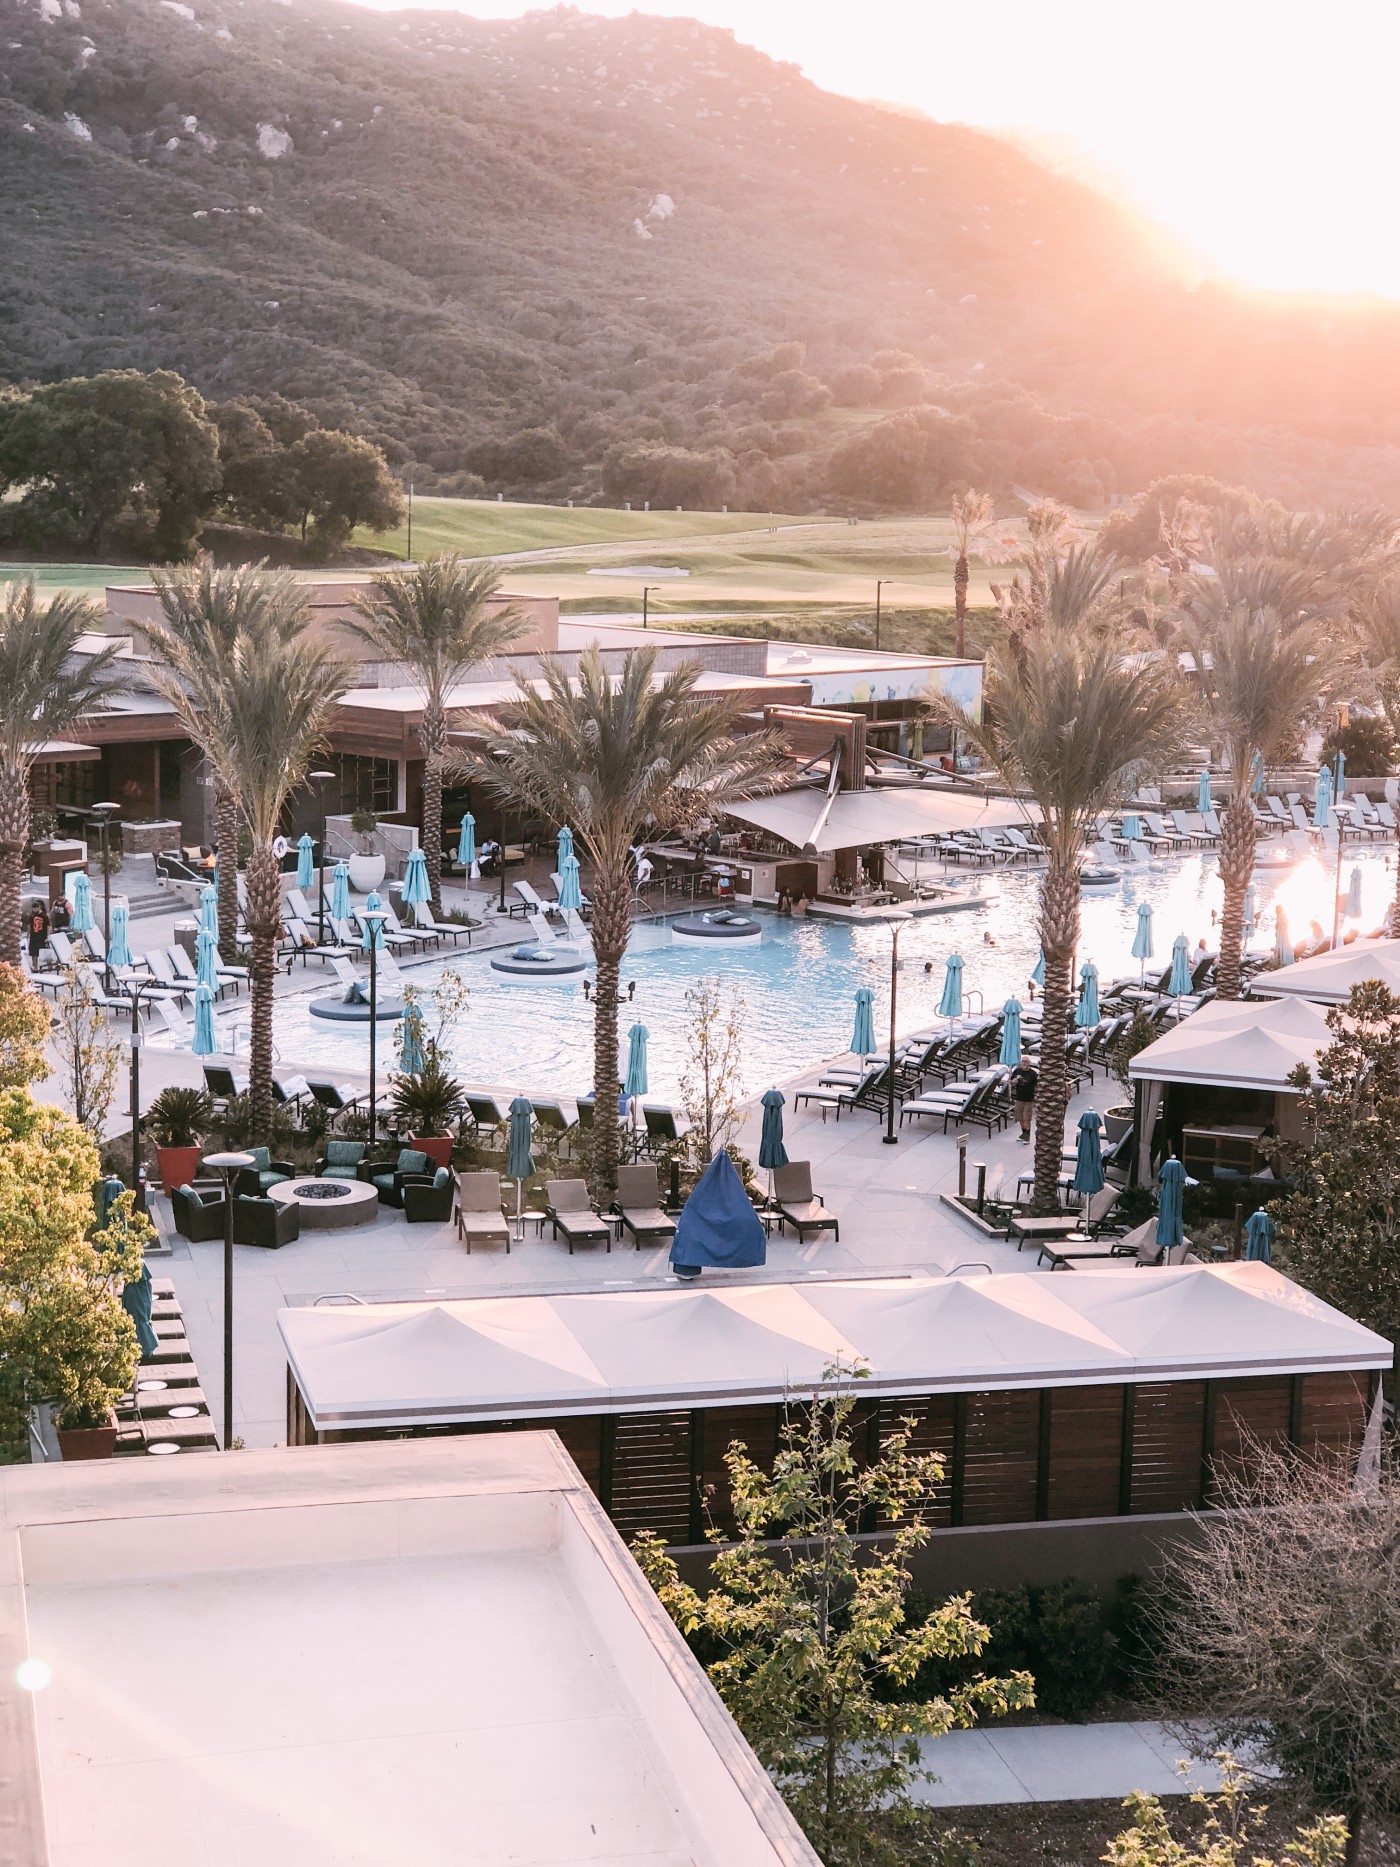 Summer is coming which of course means time to travel, right? Live in Southern California and need a bit of a staycation? See why you need to visit Temecula Valley this summer ASAP!